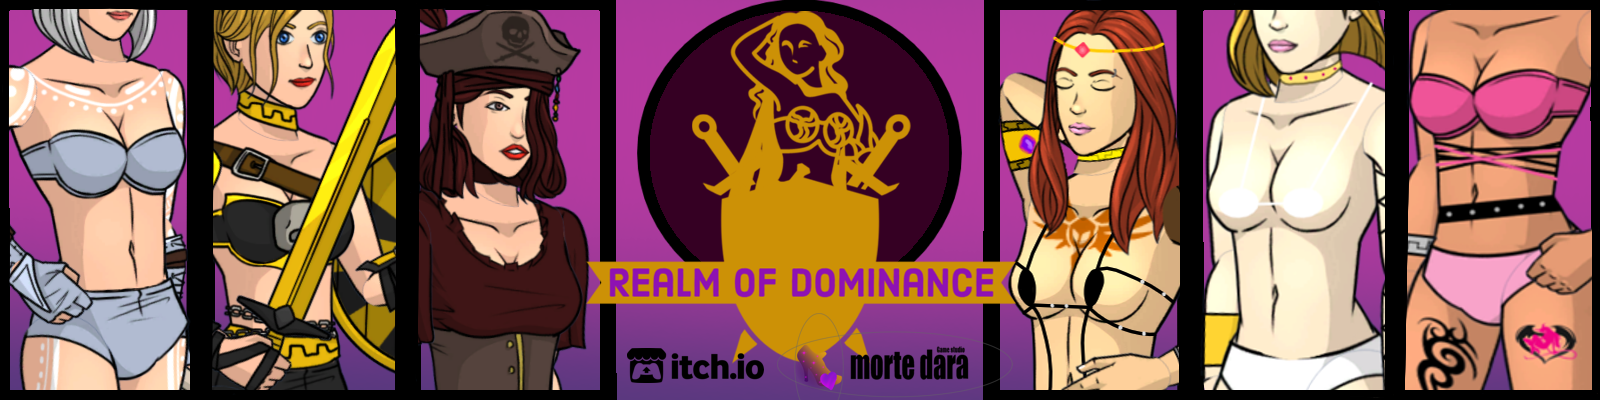 Realm of Dominance